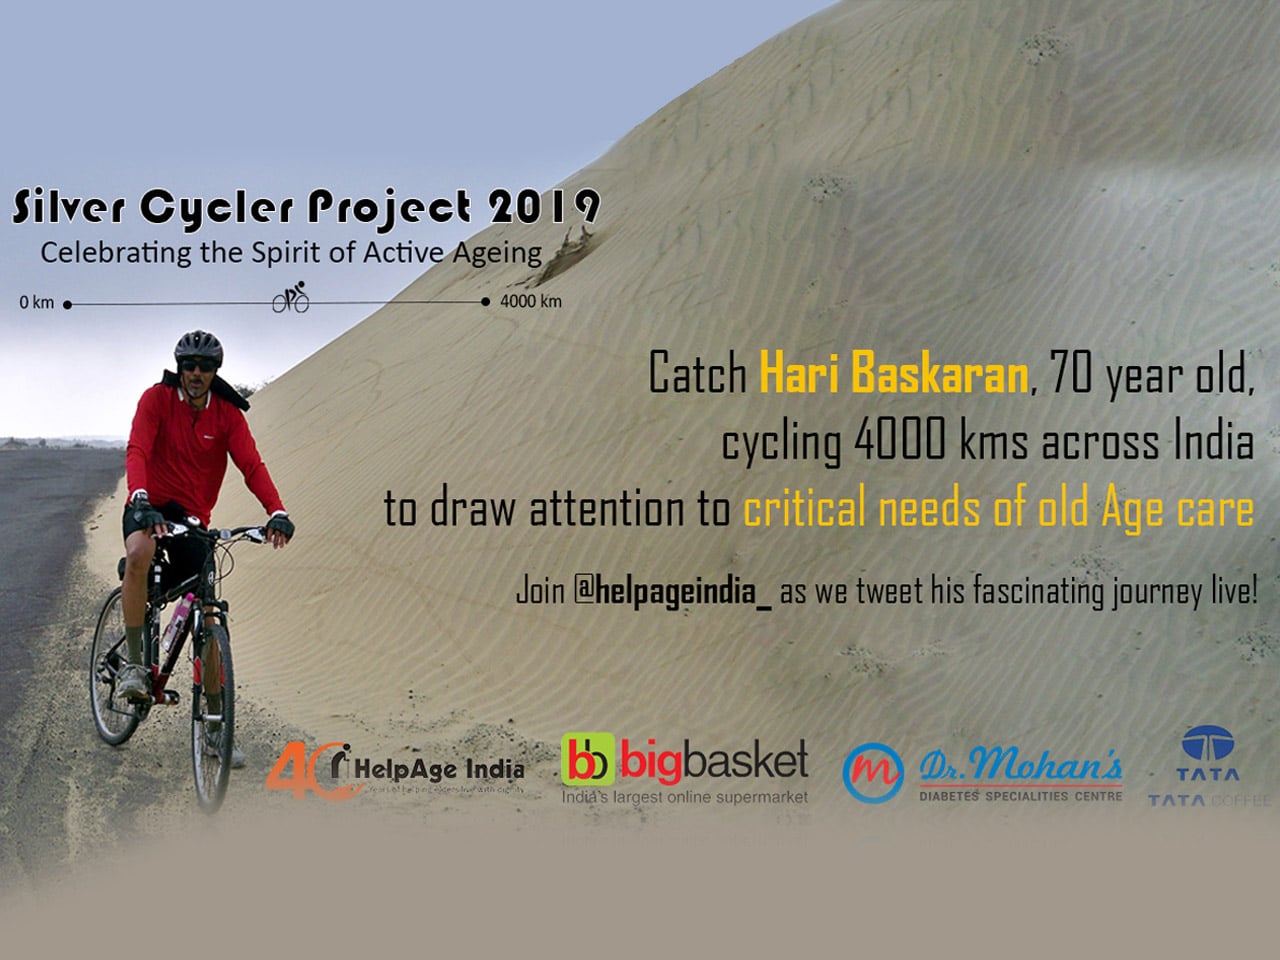 Silver Cycler Project 2019 - Celebrating the Spirit of Active Ageing